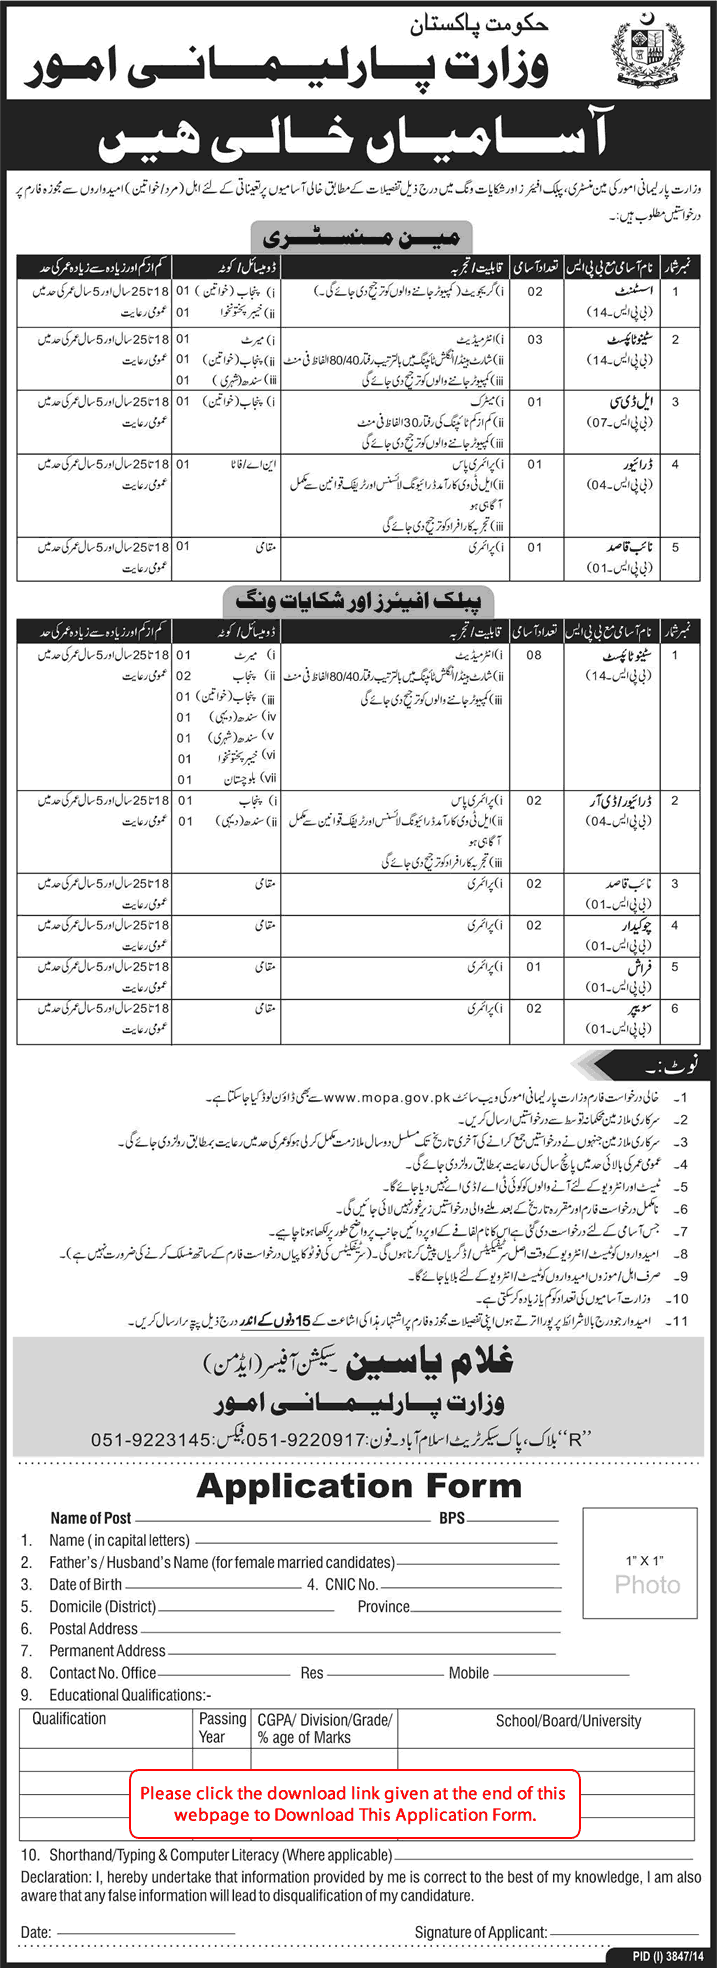 Ministry of Parliamentary Affairs Islamabad Jobs 2015 February Application Form Download Latest